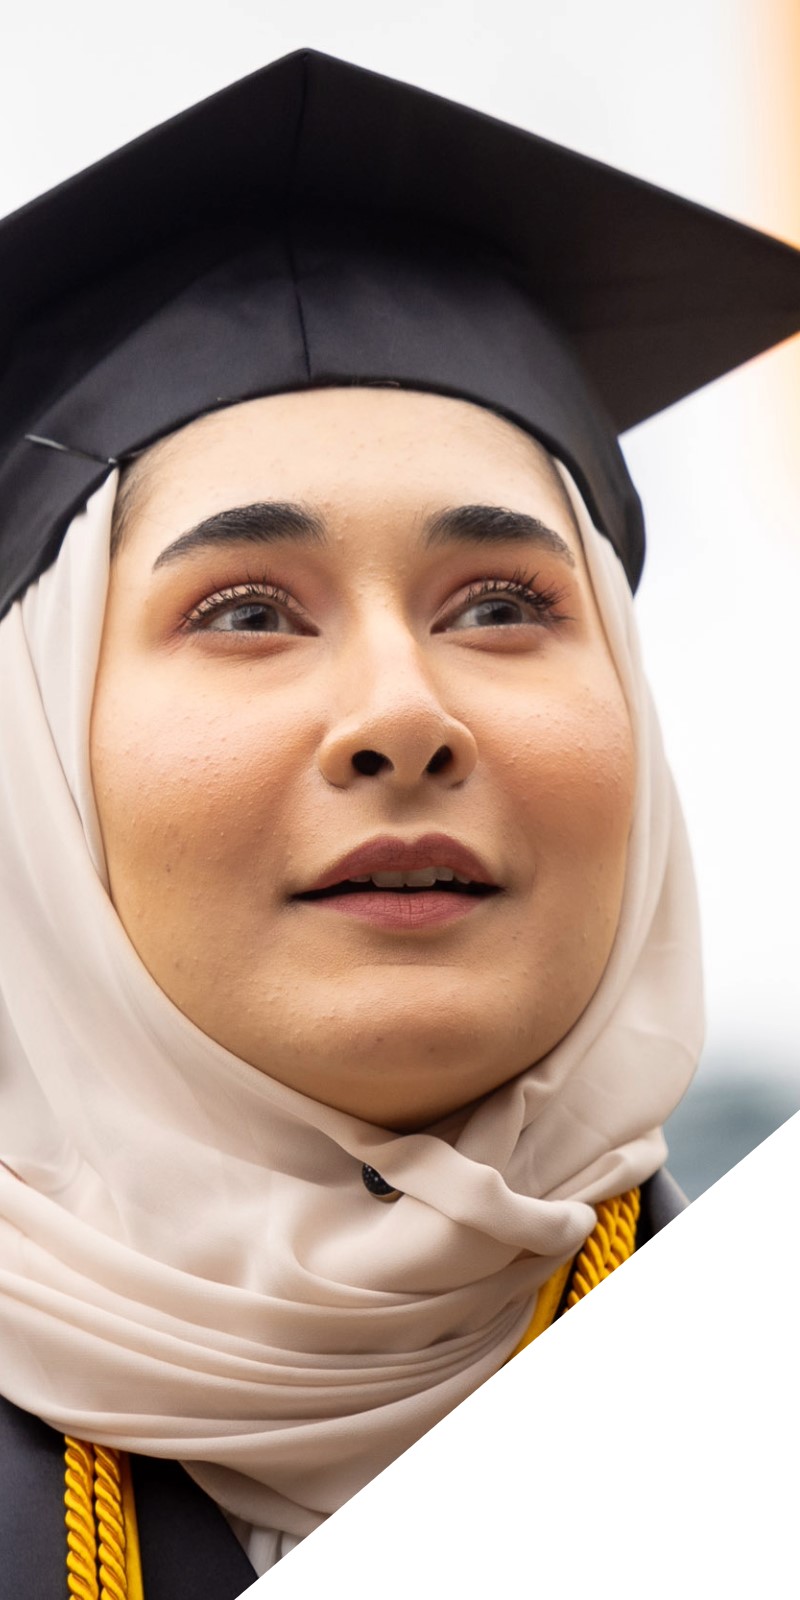 A student looks off camera in a cap and gown at graduation. 